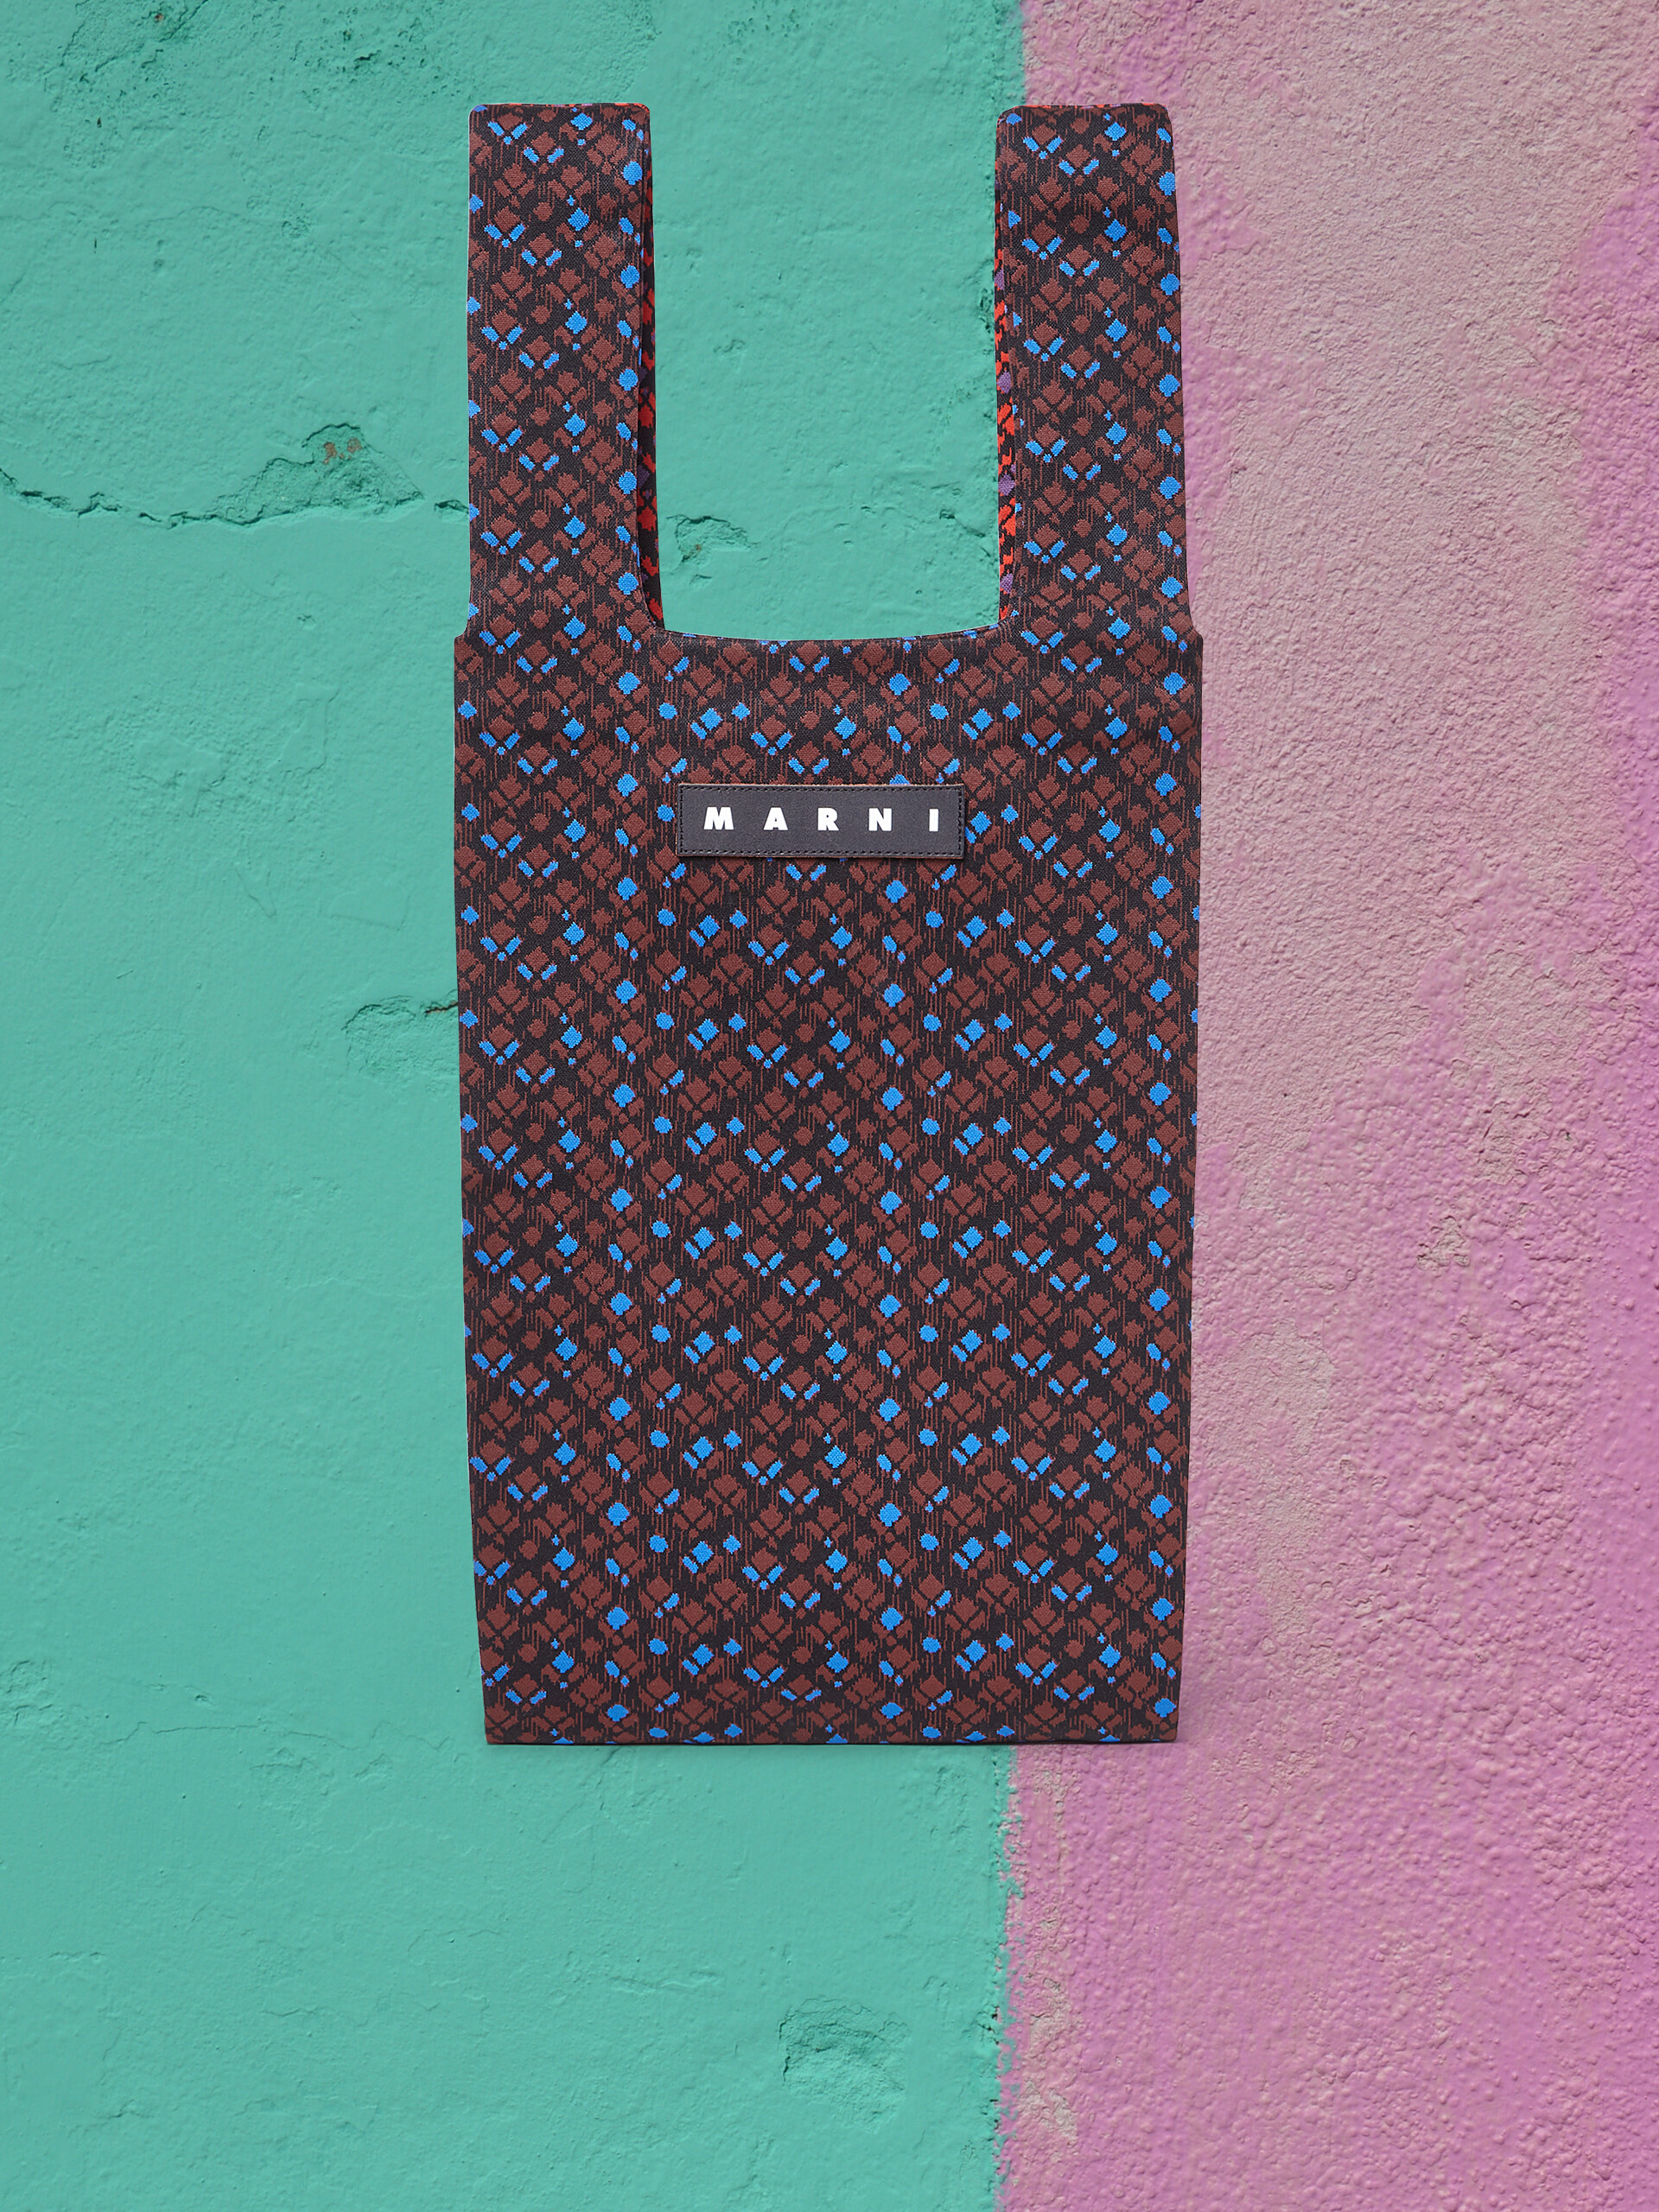 MARNI MARKET shopping bag with multicoloured print - Shopping Bags - Image 1